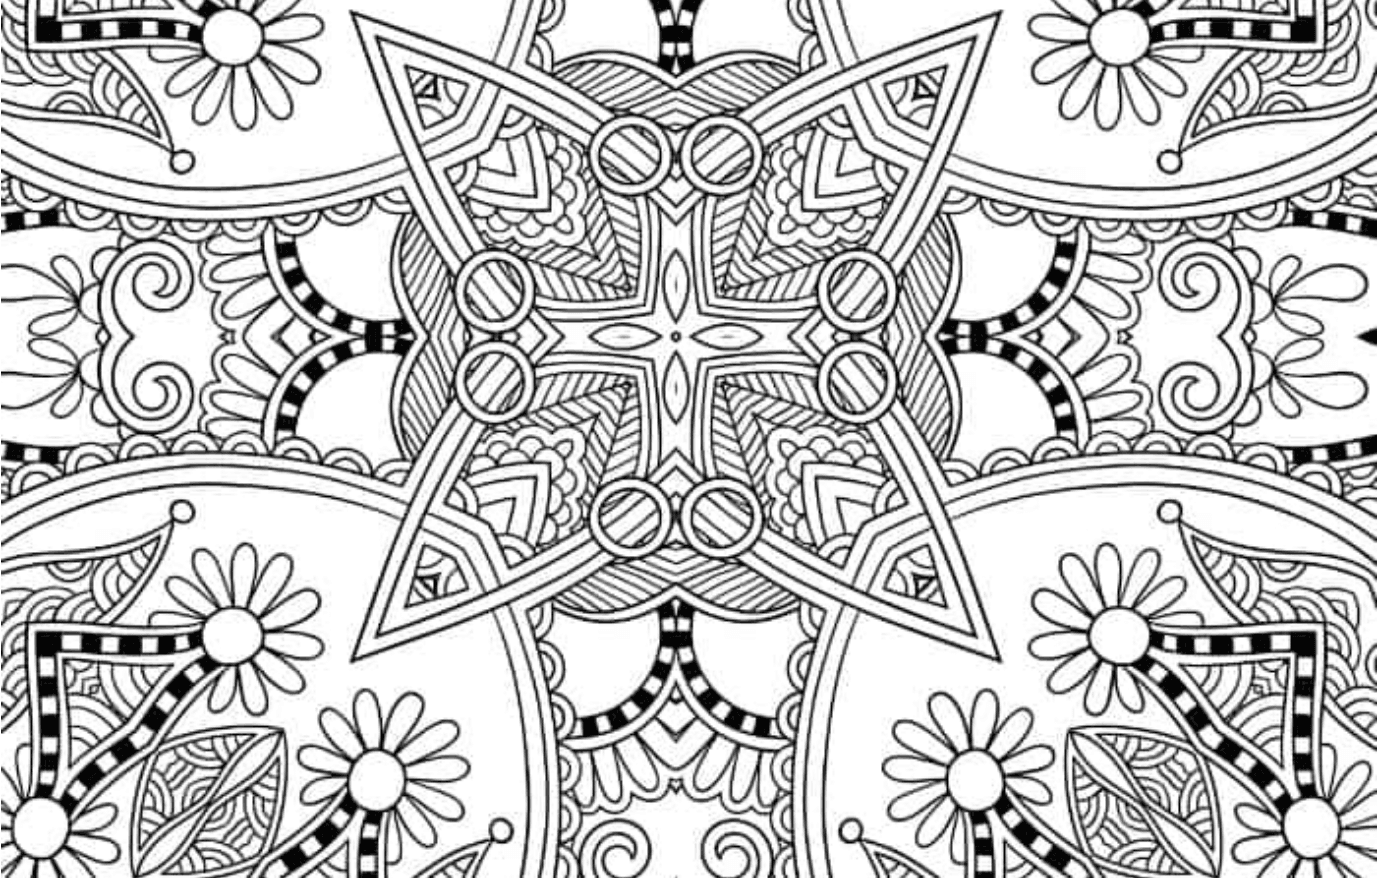 Intricate Mandala-Inspired Coloring Page for Creative Relaxation and Art Therapy